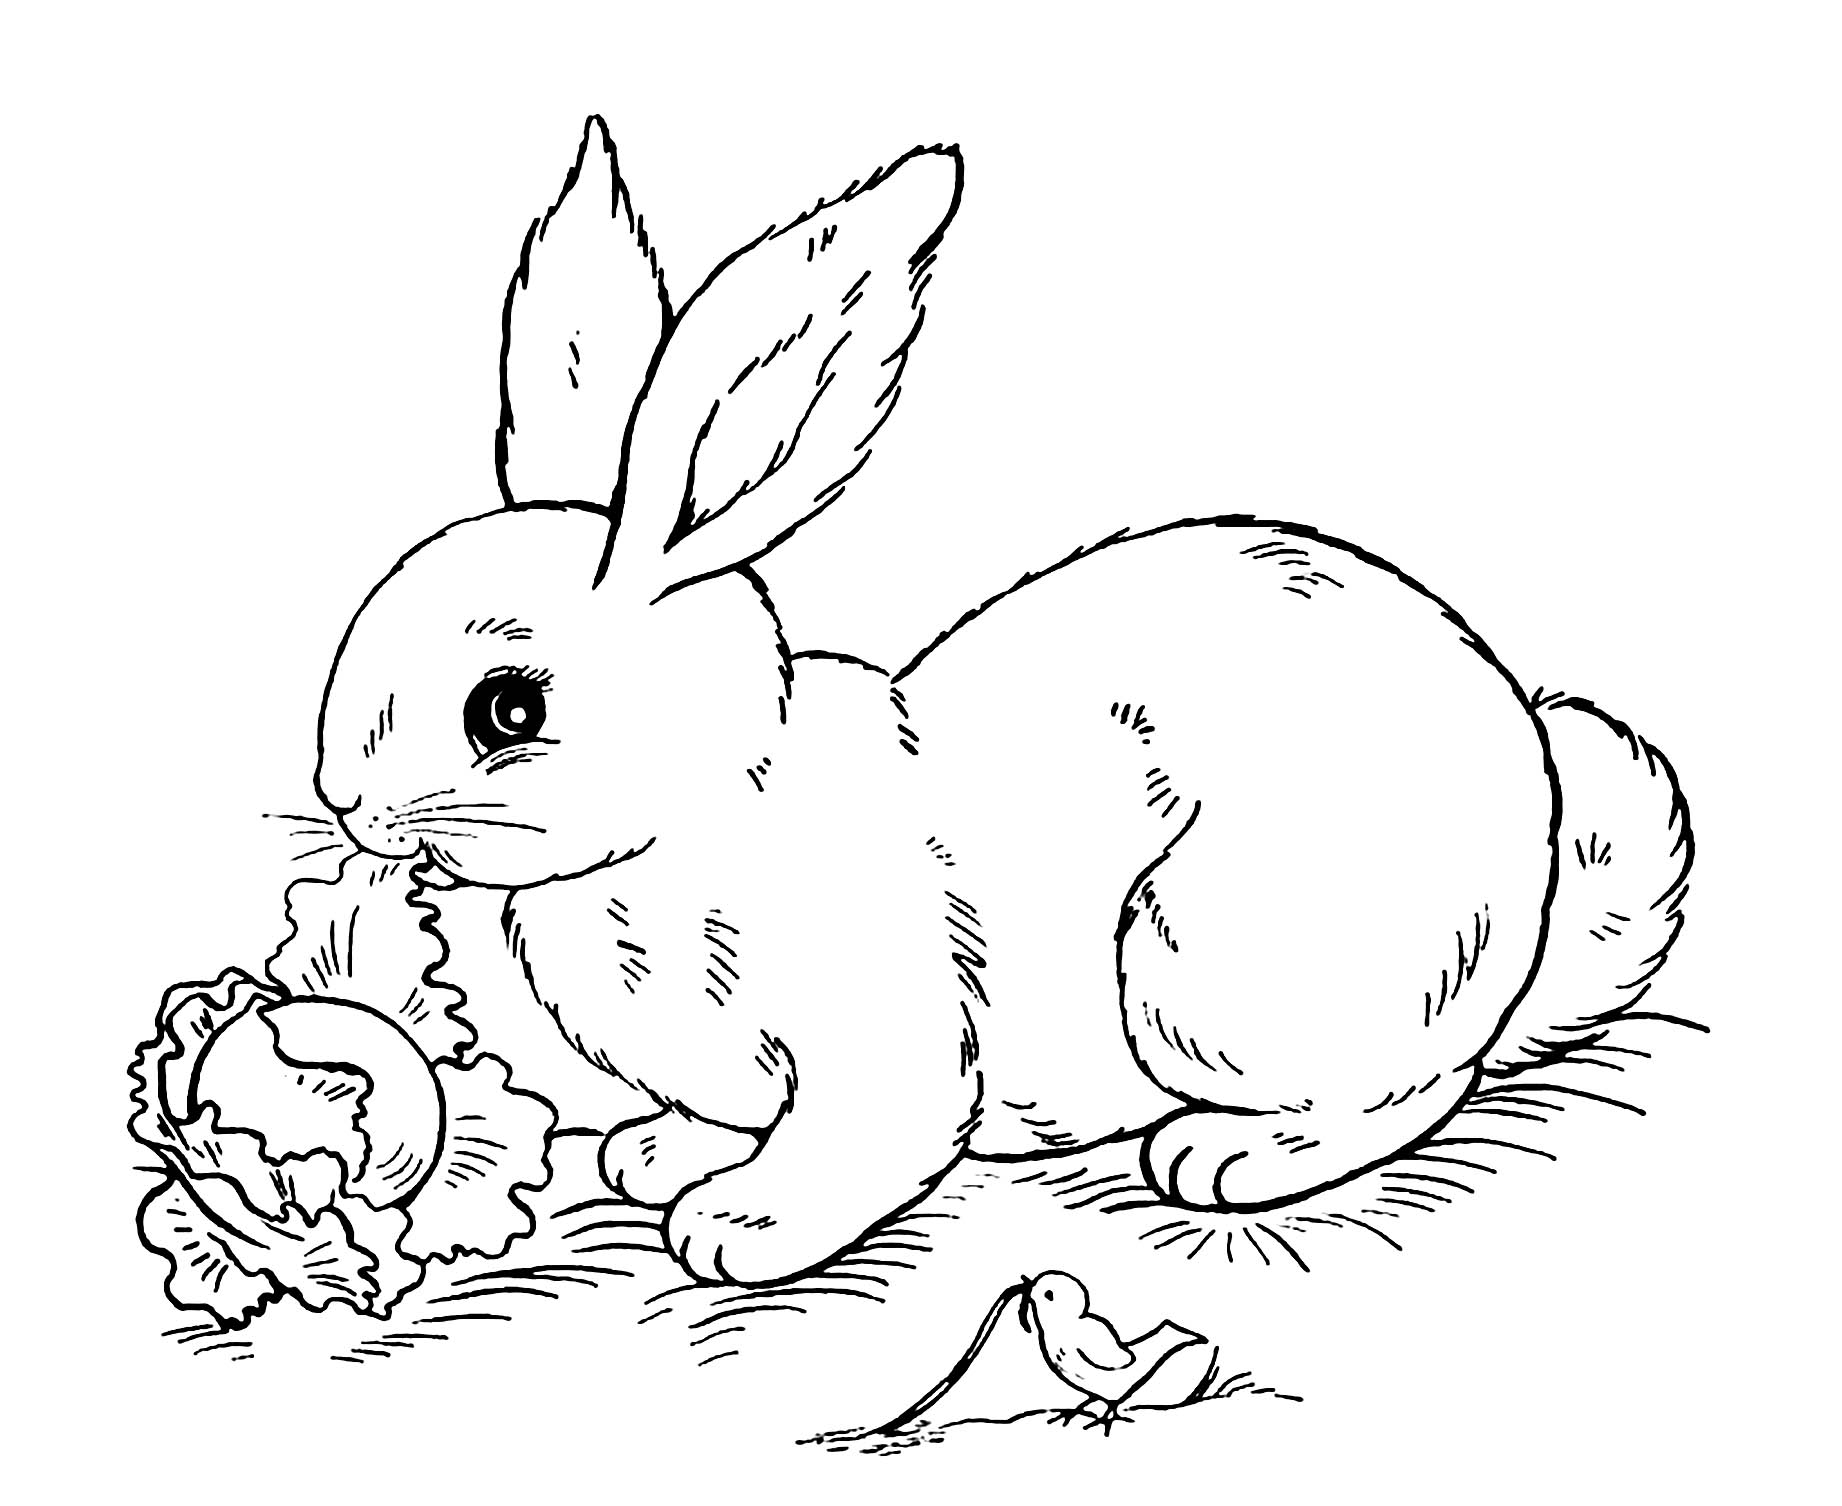 Image Of Rabbit To Print And Color - Rabbits &Amp; Bunnies Kids Coloring Pages